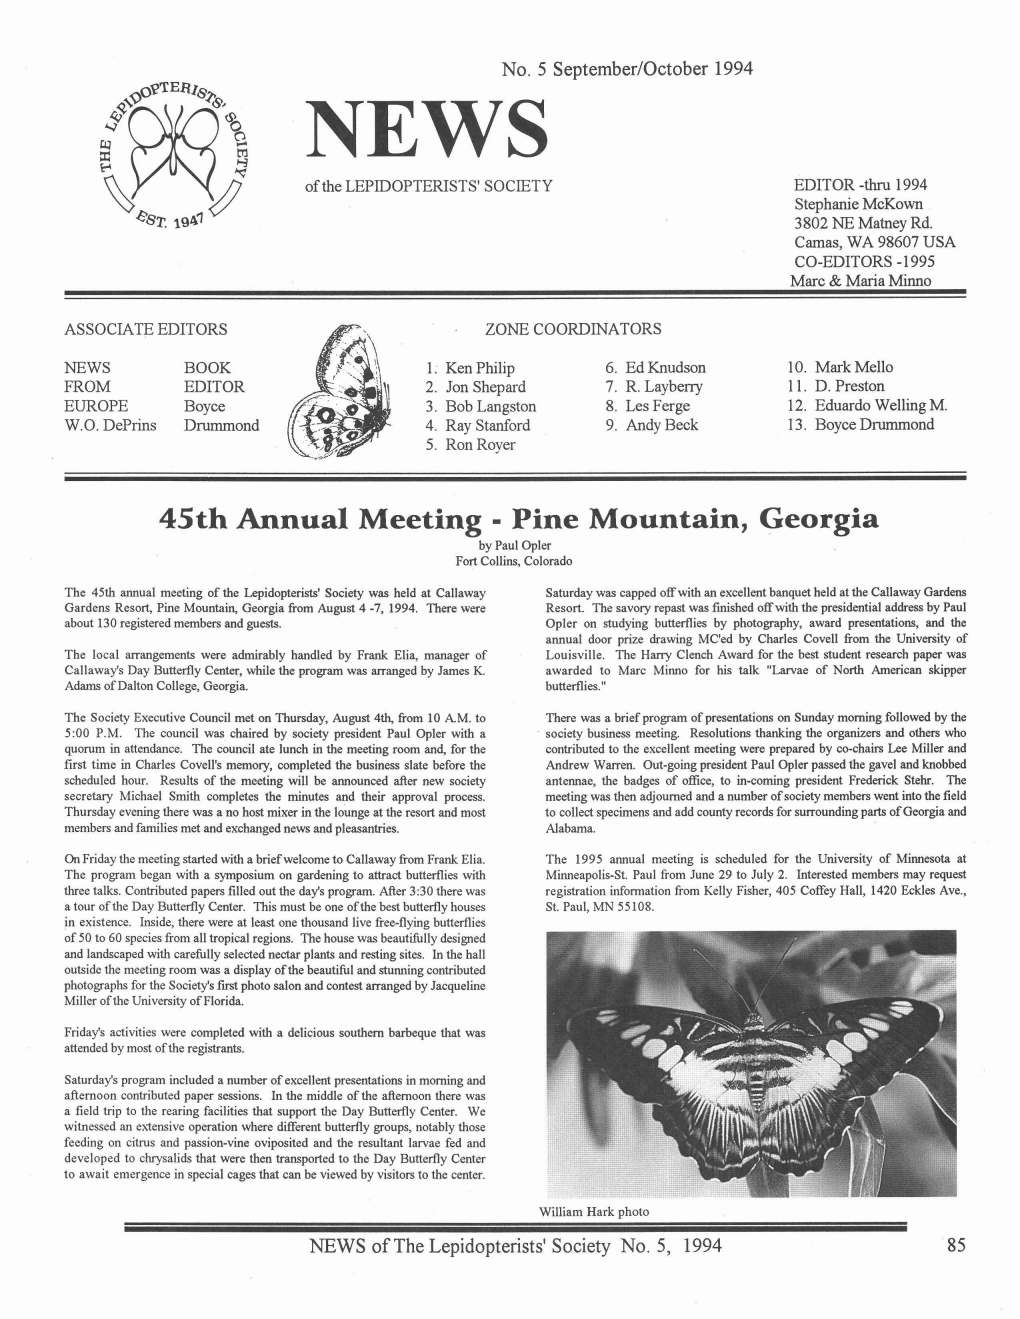 45Th Annual Meeting. Pine Mountain, Georgia by Paul Opler Fort Collins, Colorado